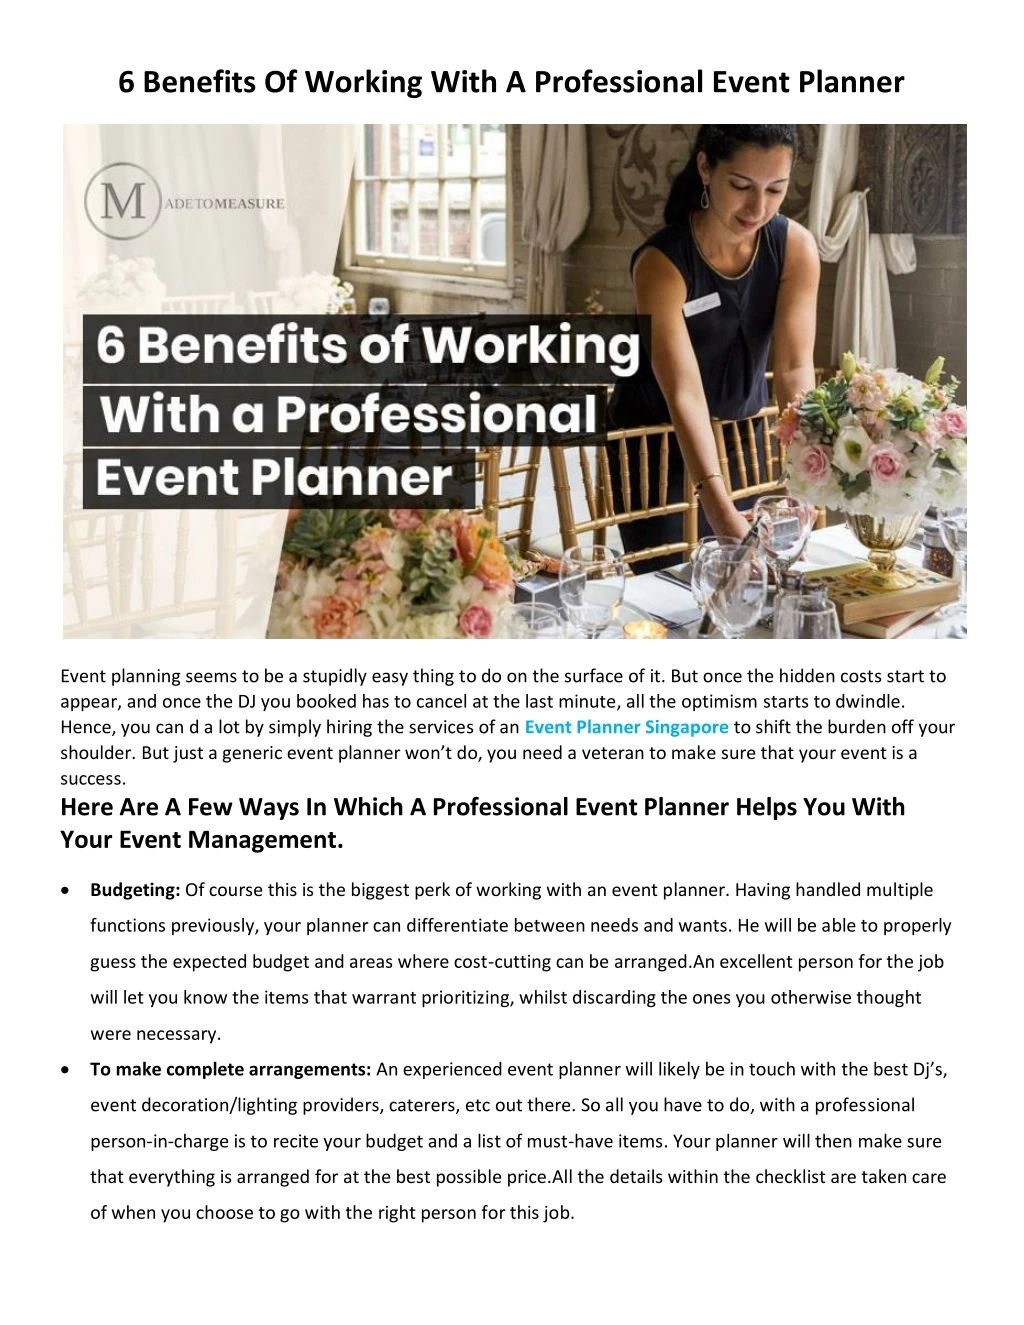 6 benefits of working with a professional event